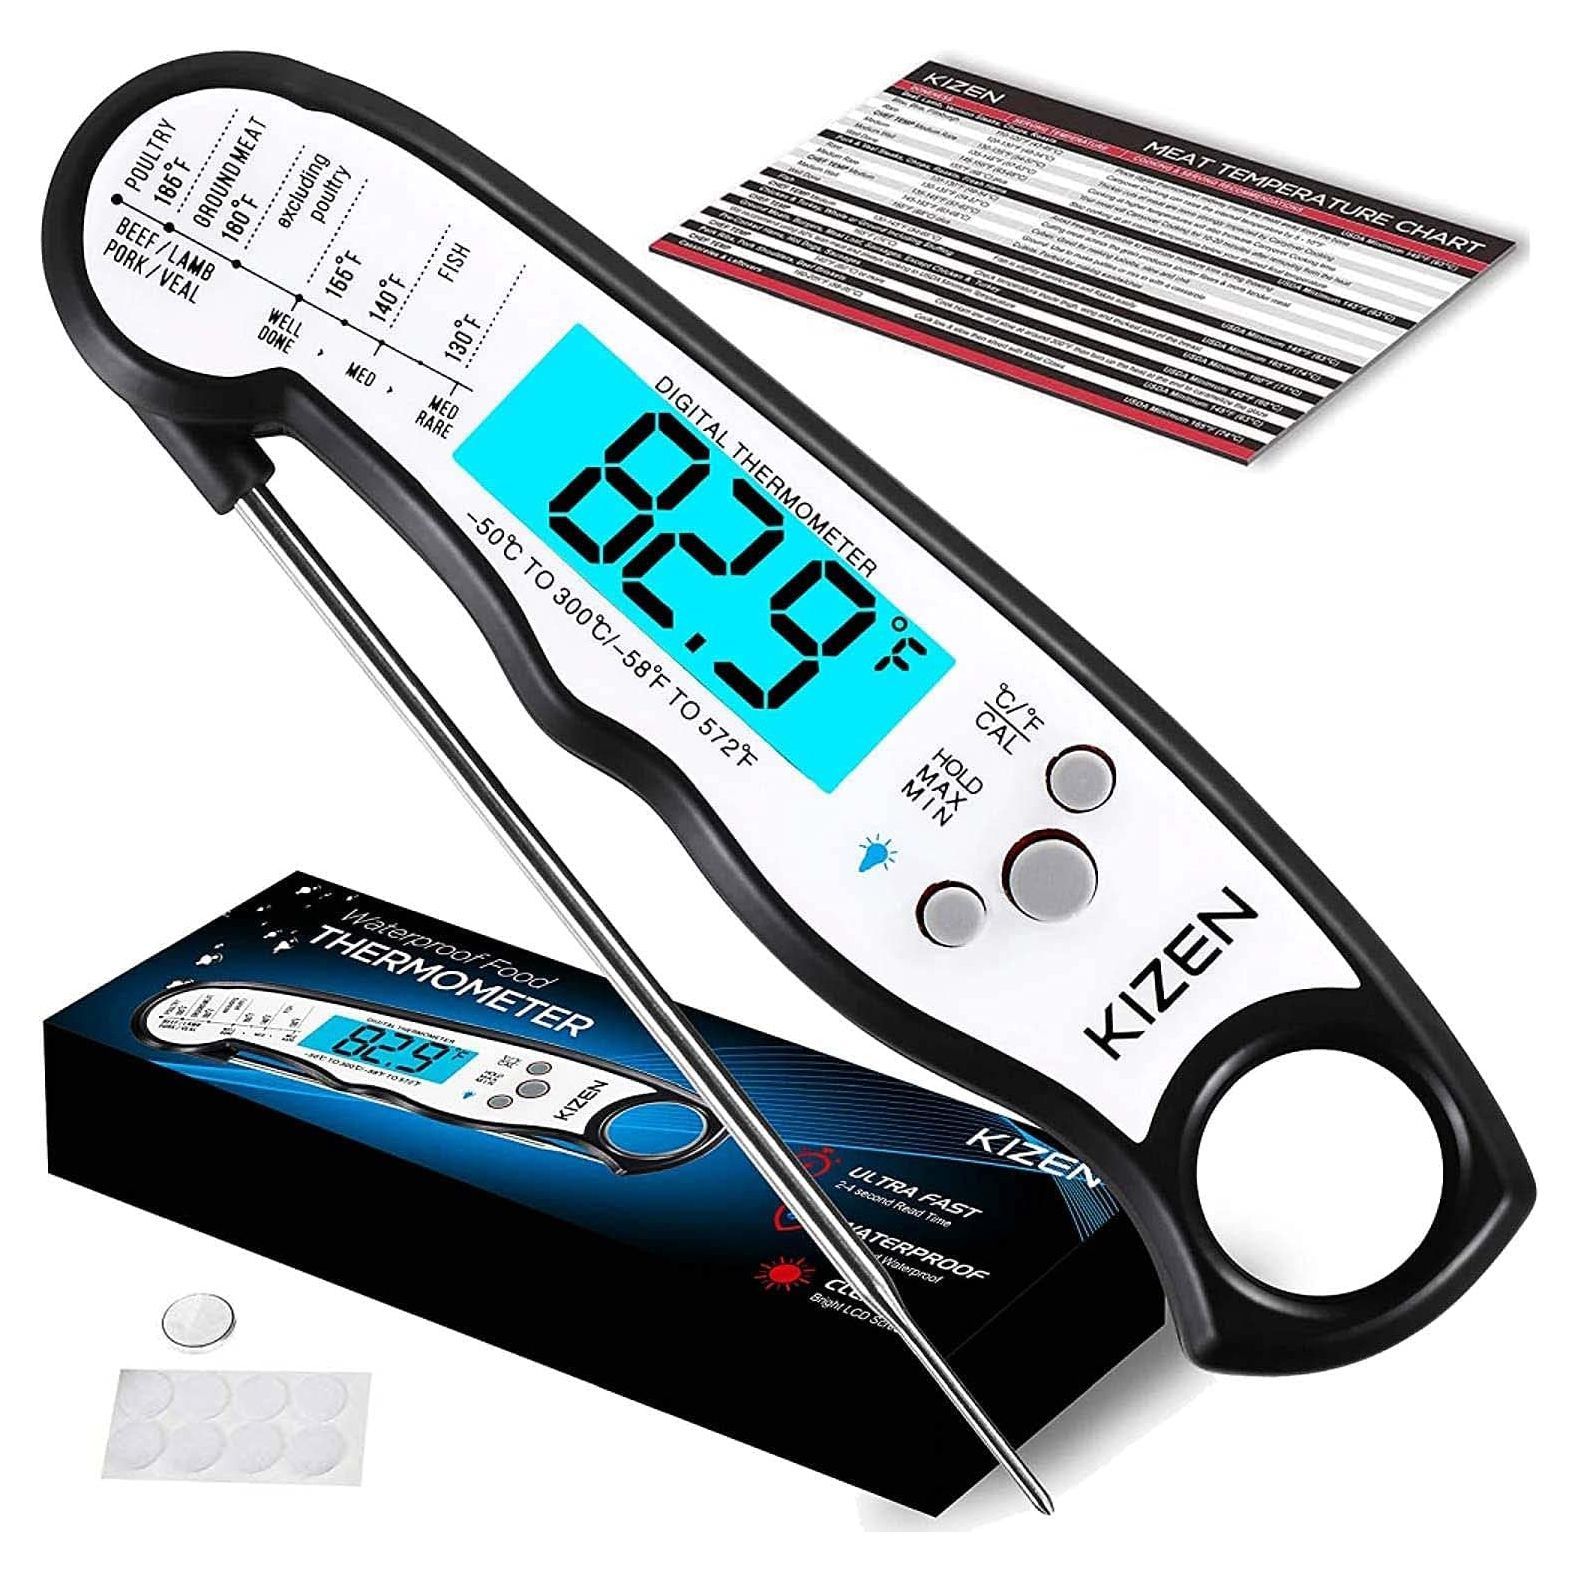 Digital Meat Thermometer